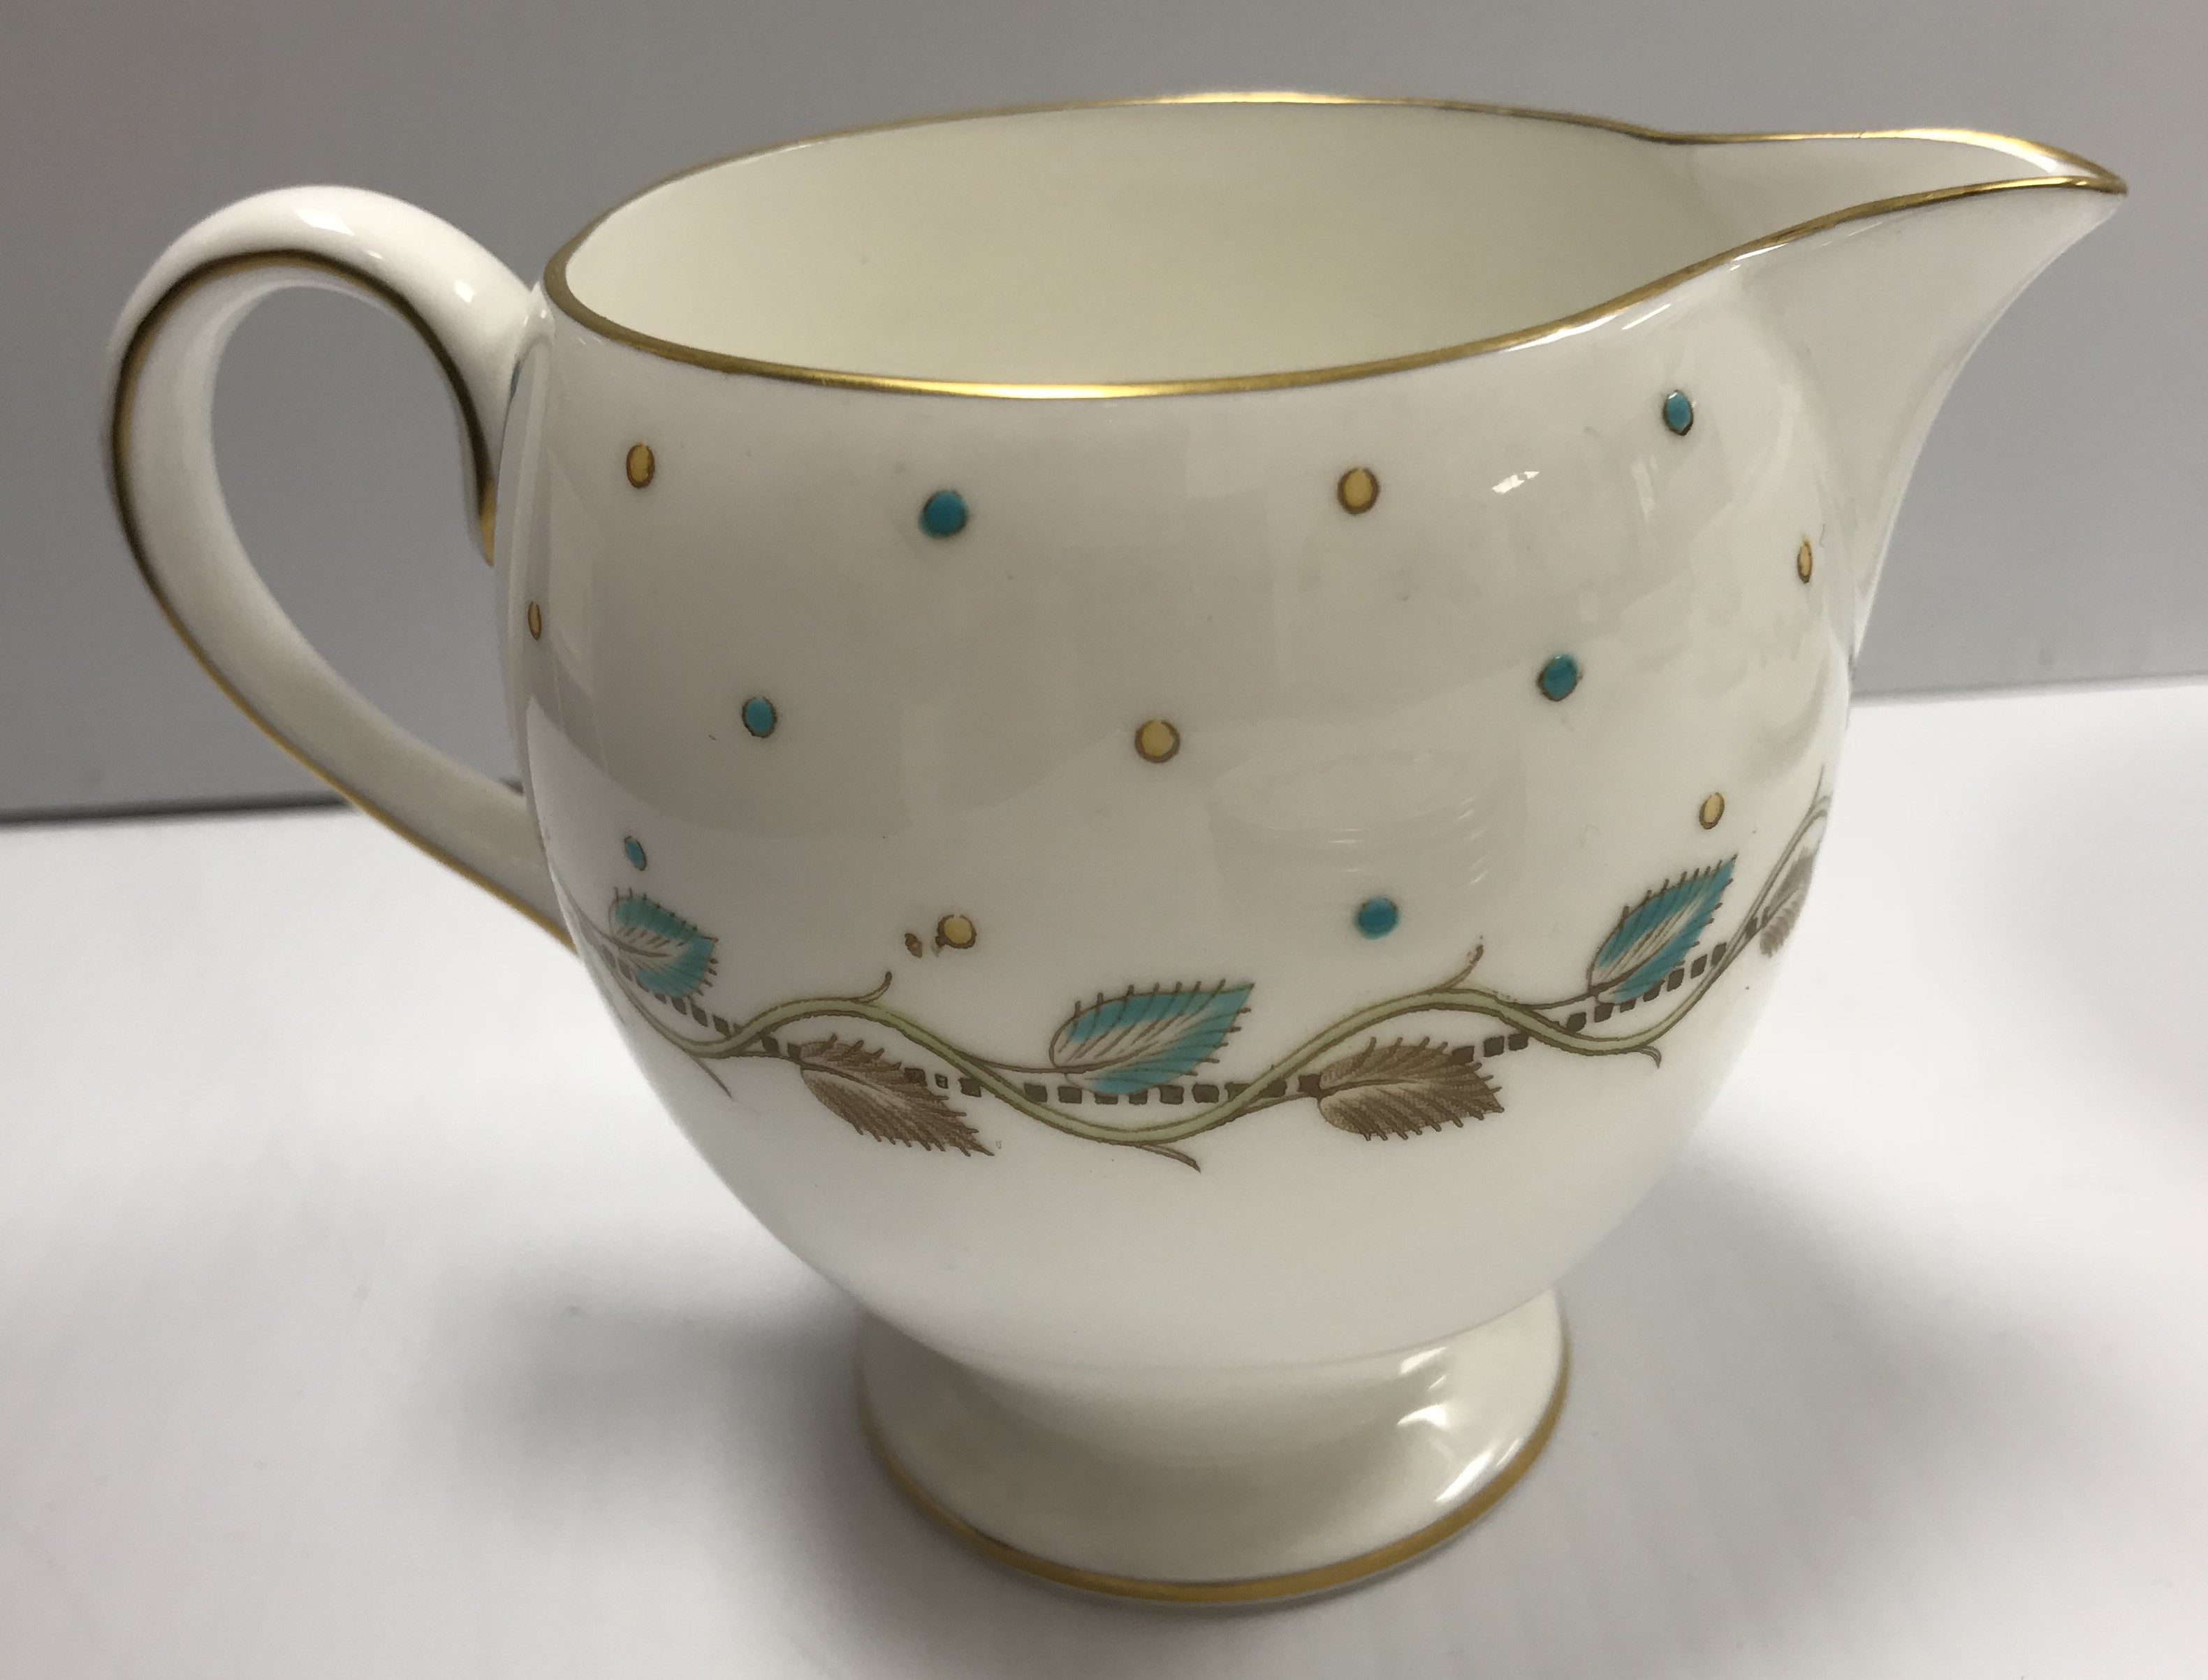 A Royal Doulton "Harmony Leaf" (H4864) six place tea set comprising cups, saucers, side plates, - Image 5 of 7